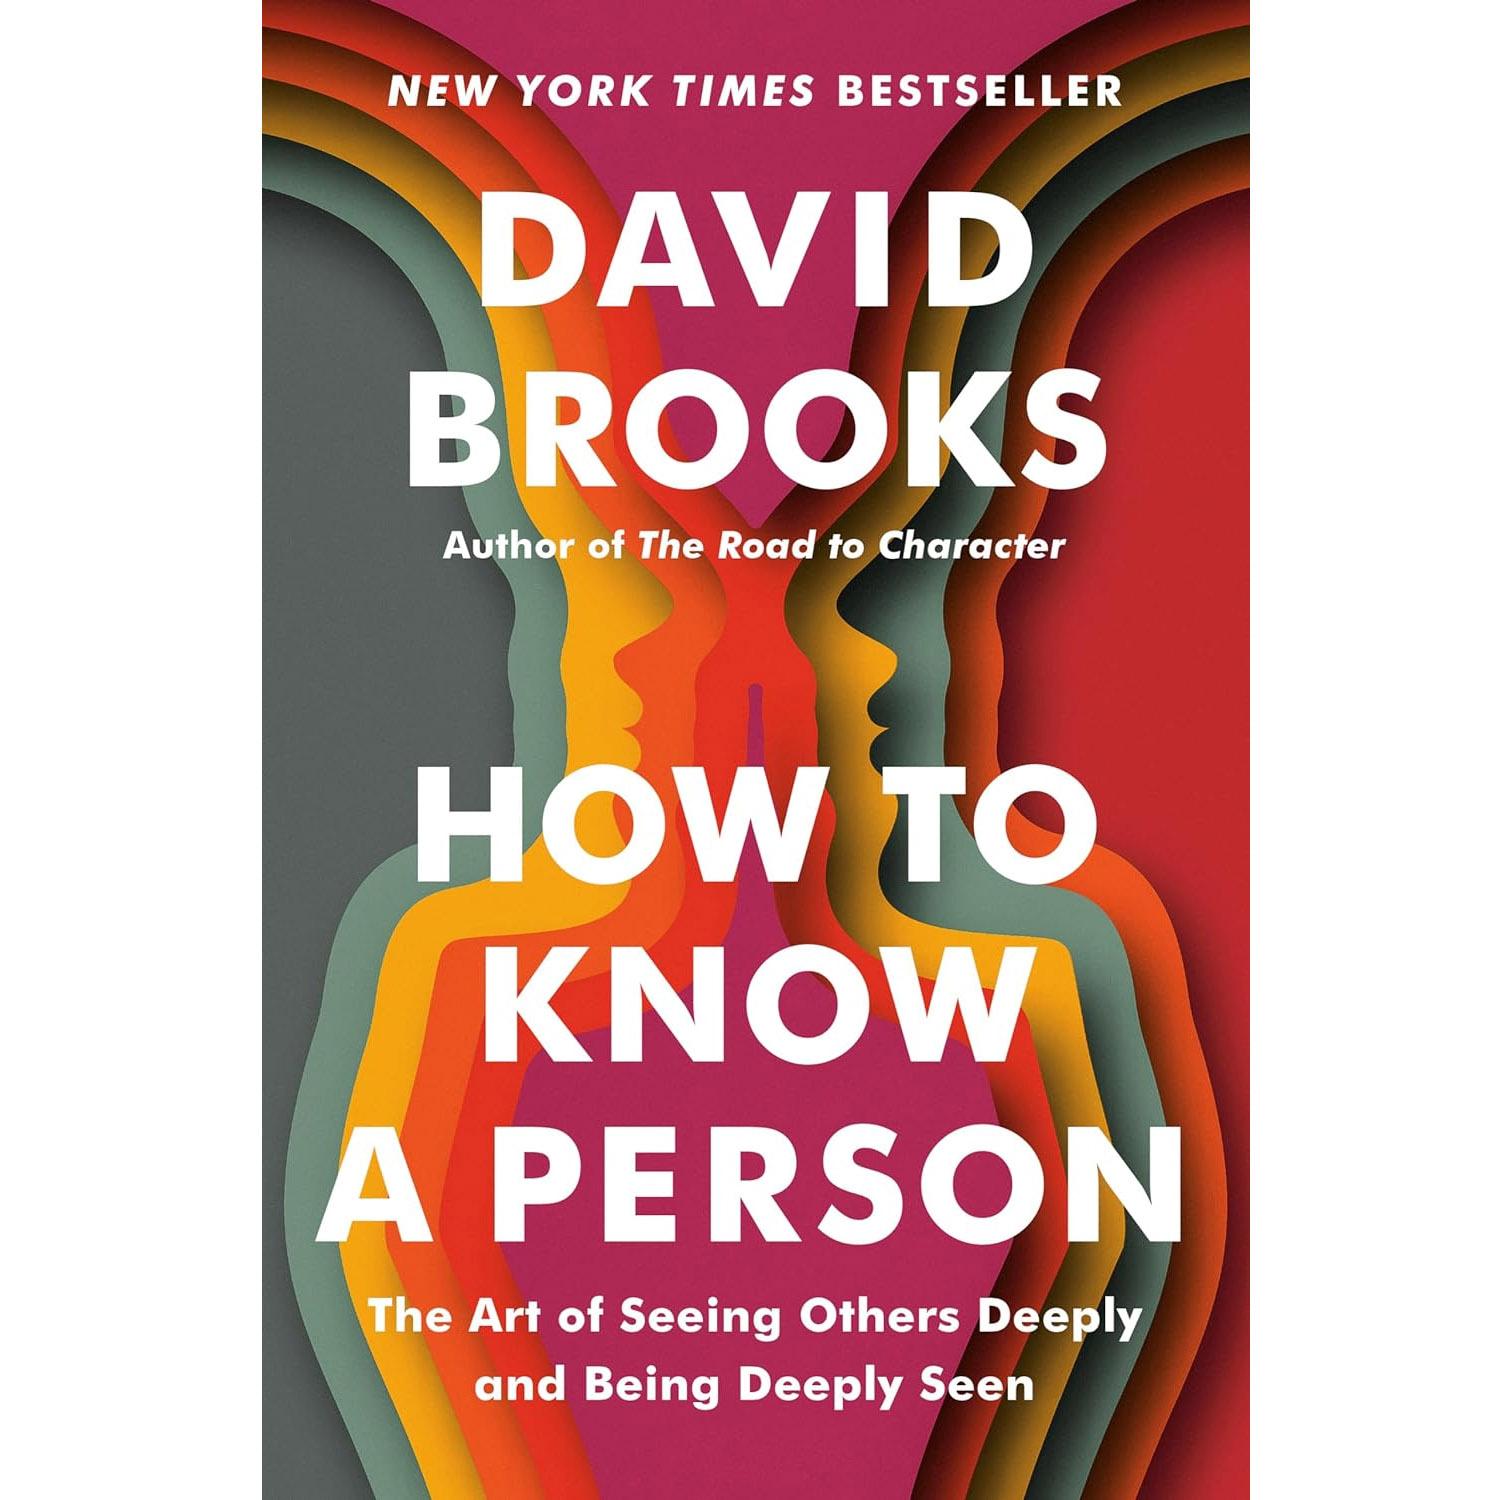 How to Know a Person The Art of Seeing Others Deeply eBook for $2.99